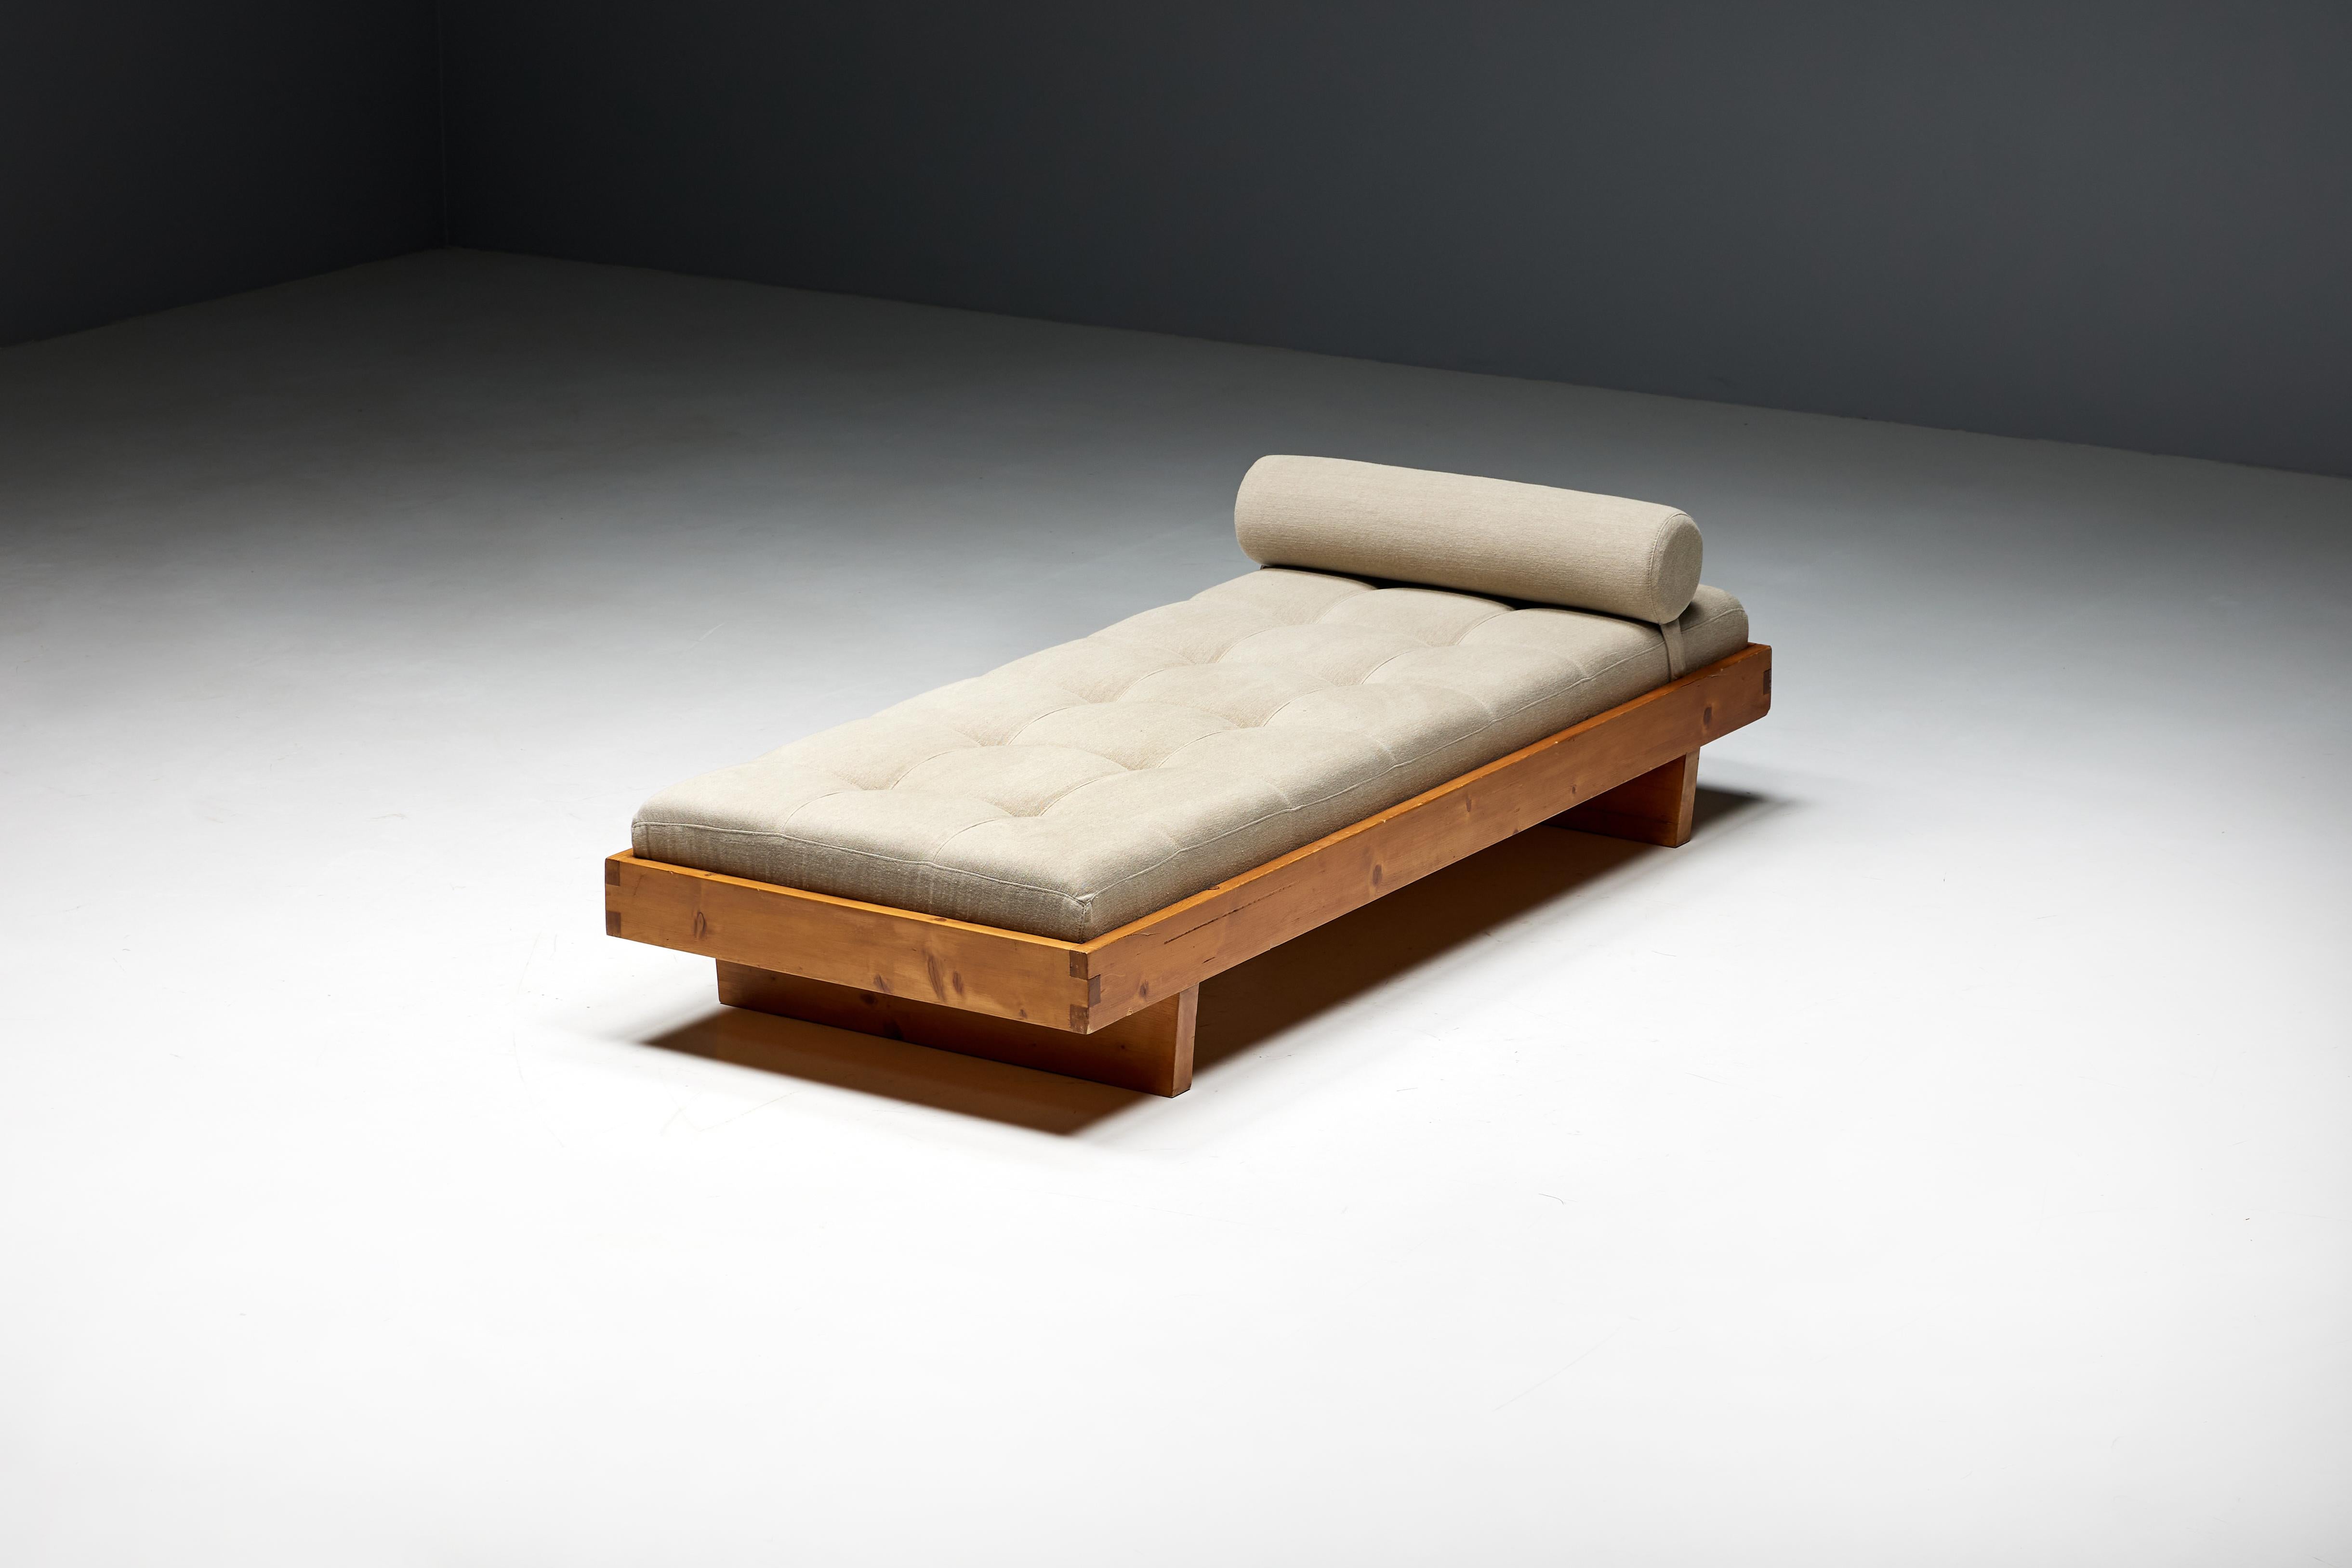 Daybed designed by Charlotte Perriand in the 1950s for the chalets of Méribel Les Allues, France. This masterpiece of design embodies the perfect harmony between functionality and aesthetics. Crafted from pine wood, the daybed exudes the warmth of